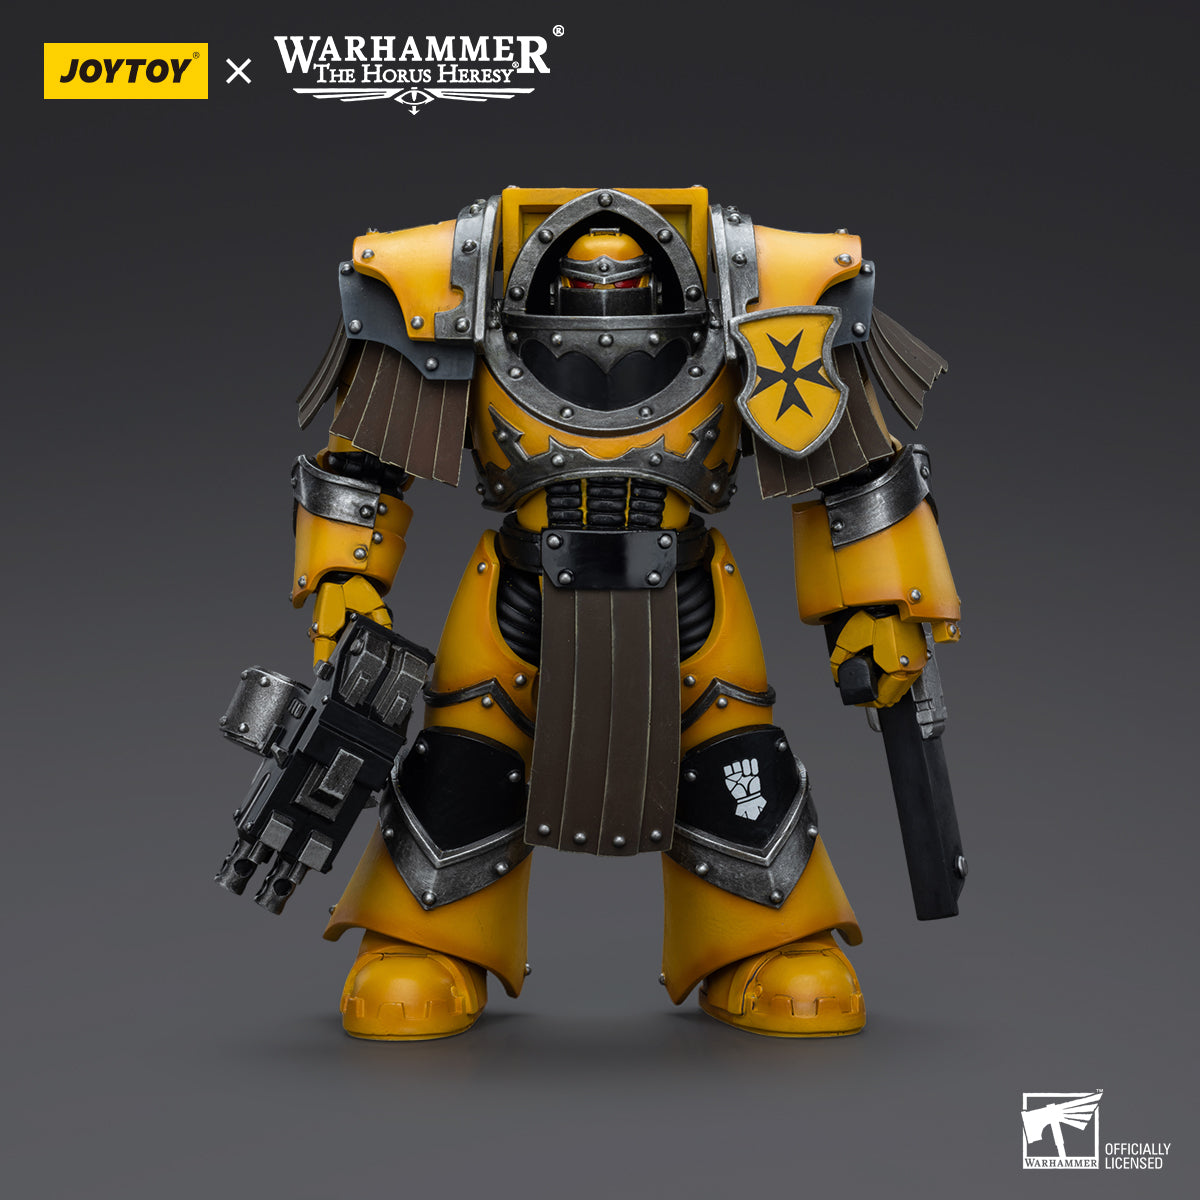 Warhammer Collectibles: 1/18 Scale Imperial Fists Legion Cataphractii Terminator Squad w/ Chainfist